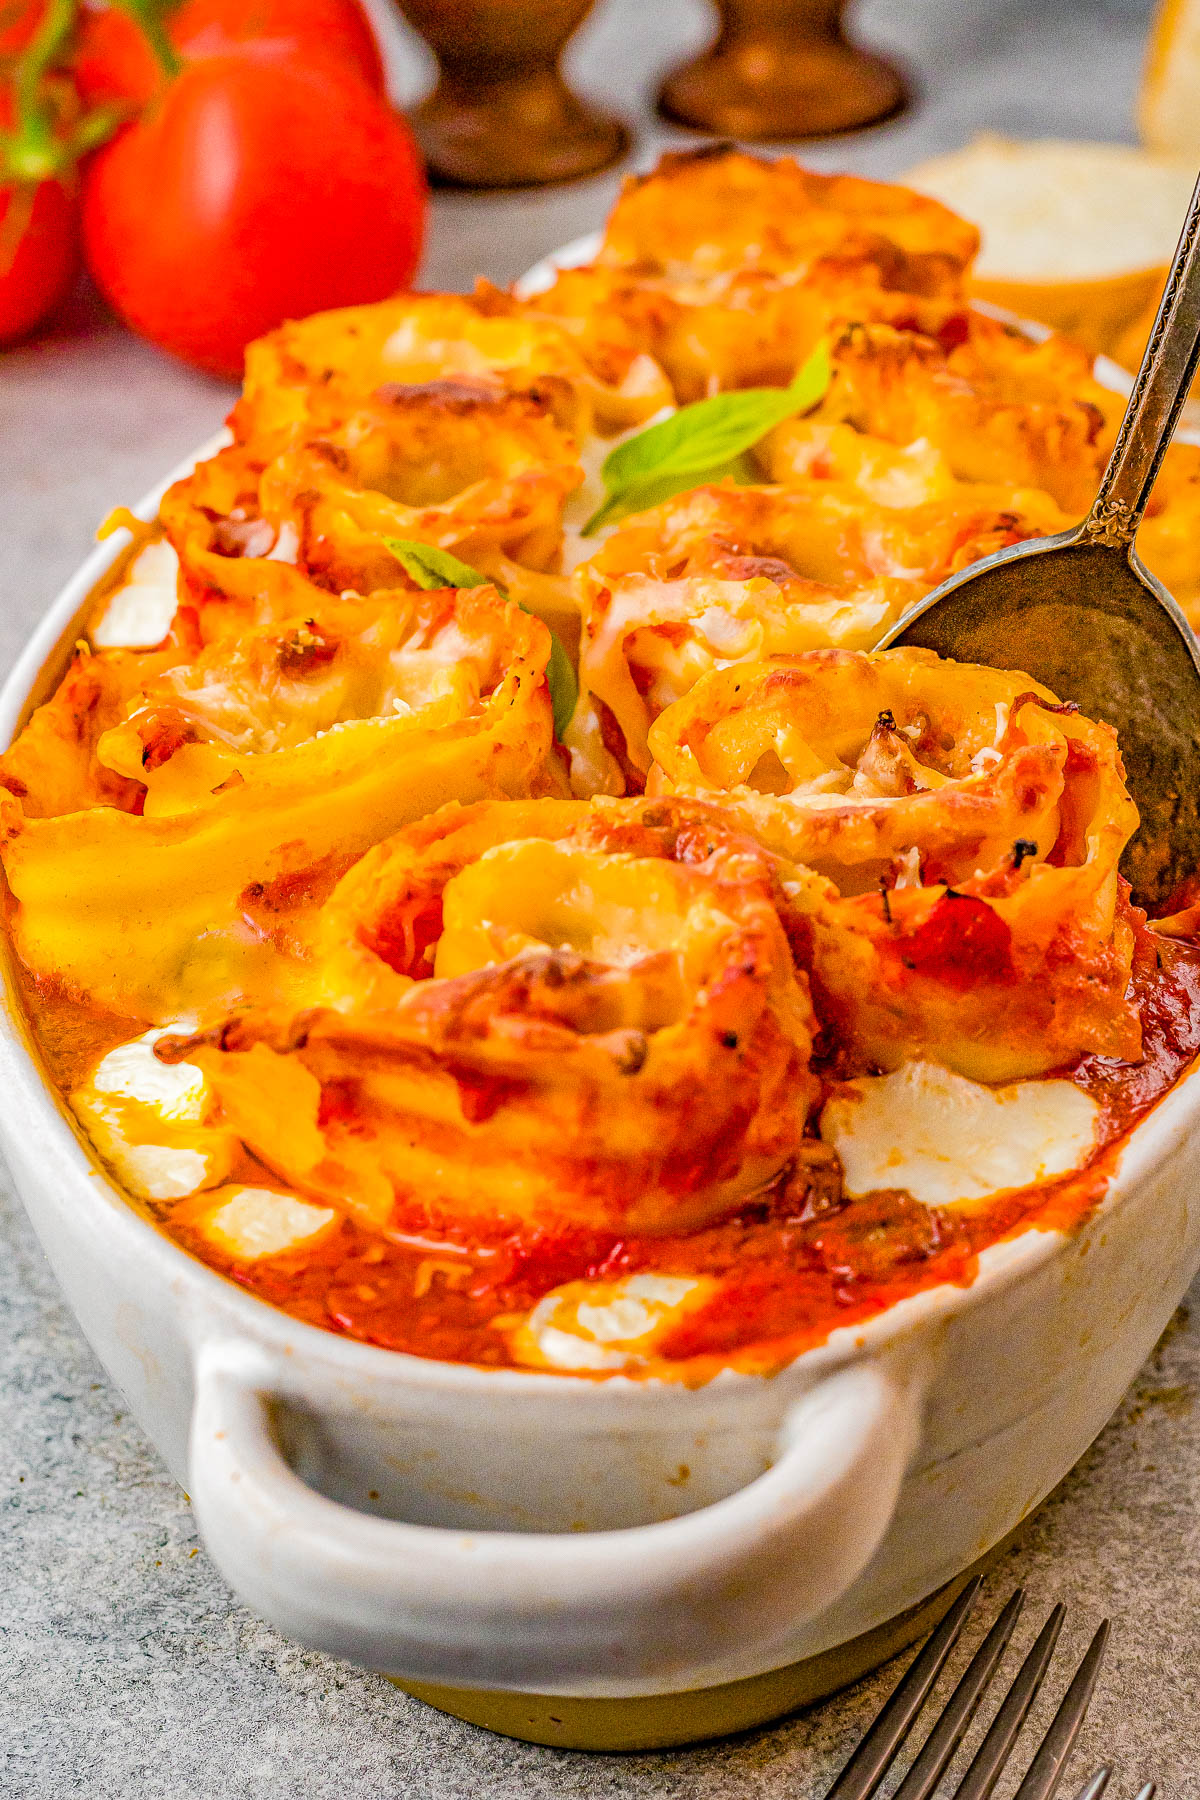 Lasagna Pinwheels – Rolled up lasagna that’s filled with juicy Italian sausage and a rich and creamy bechamel sauce before being baked in tomato sauce and more cheese! Comfort food at its finest that the whole family will LOVE! Shortcuts provided if you want to use store bought sauces rather than making your sauces to save time.